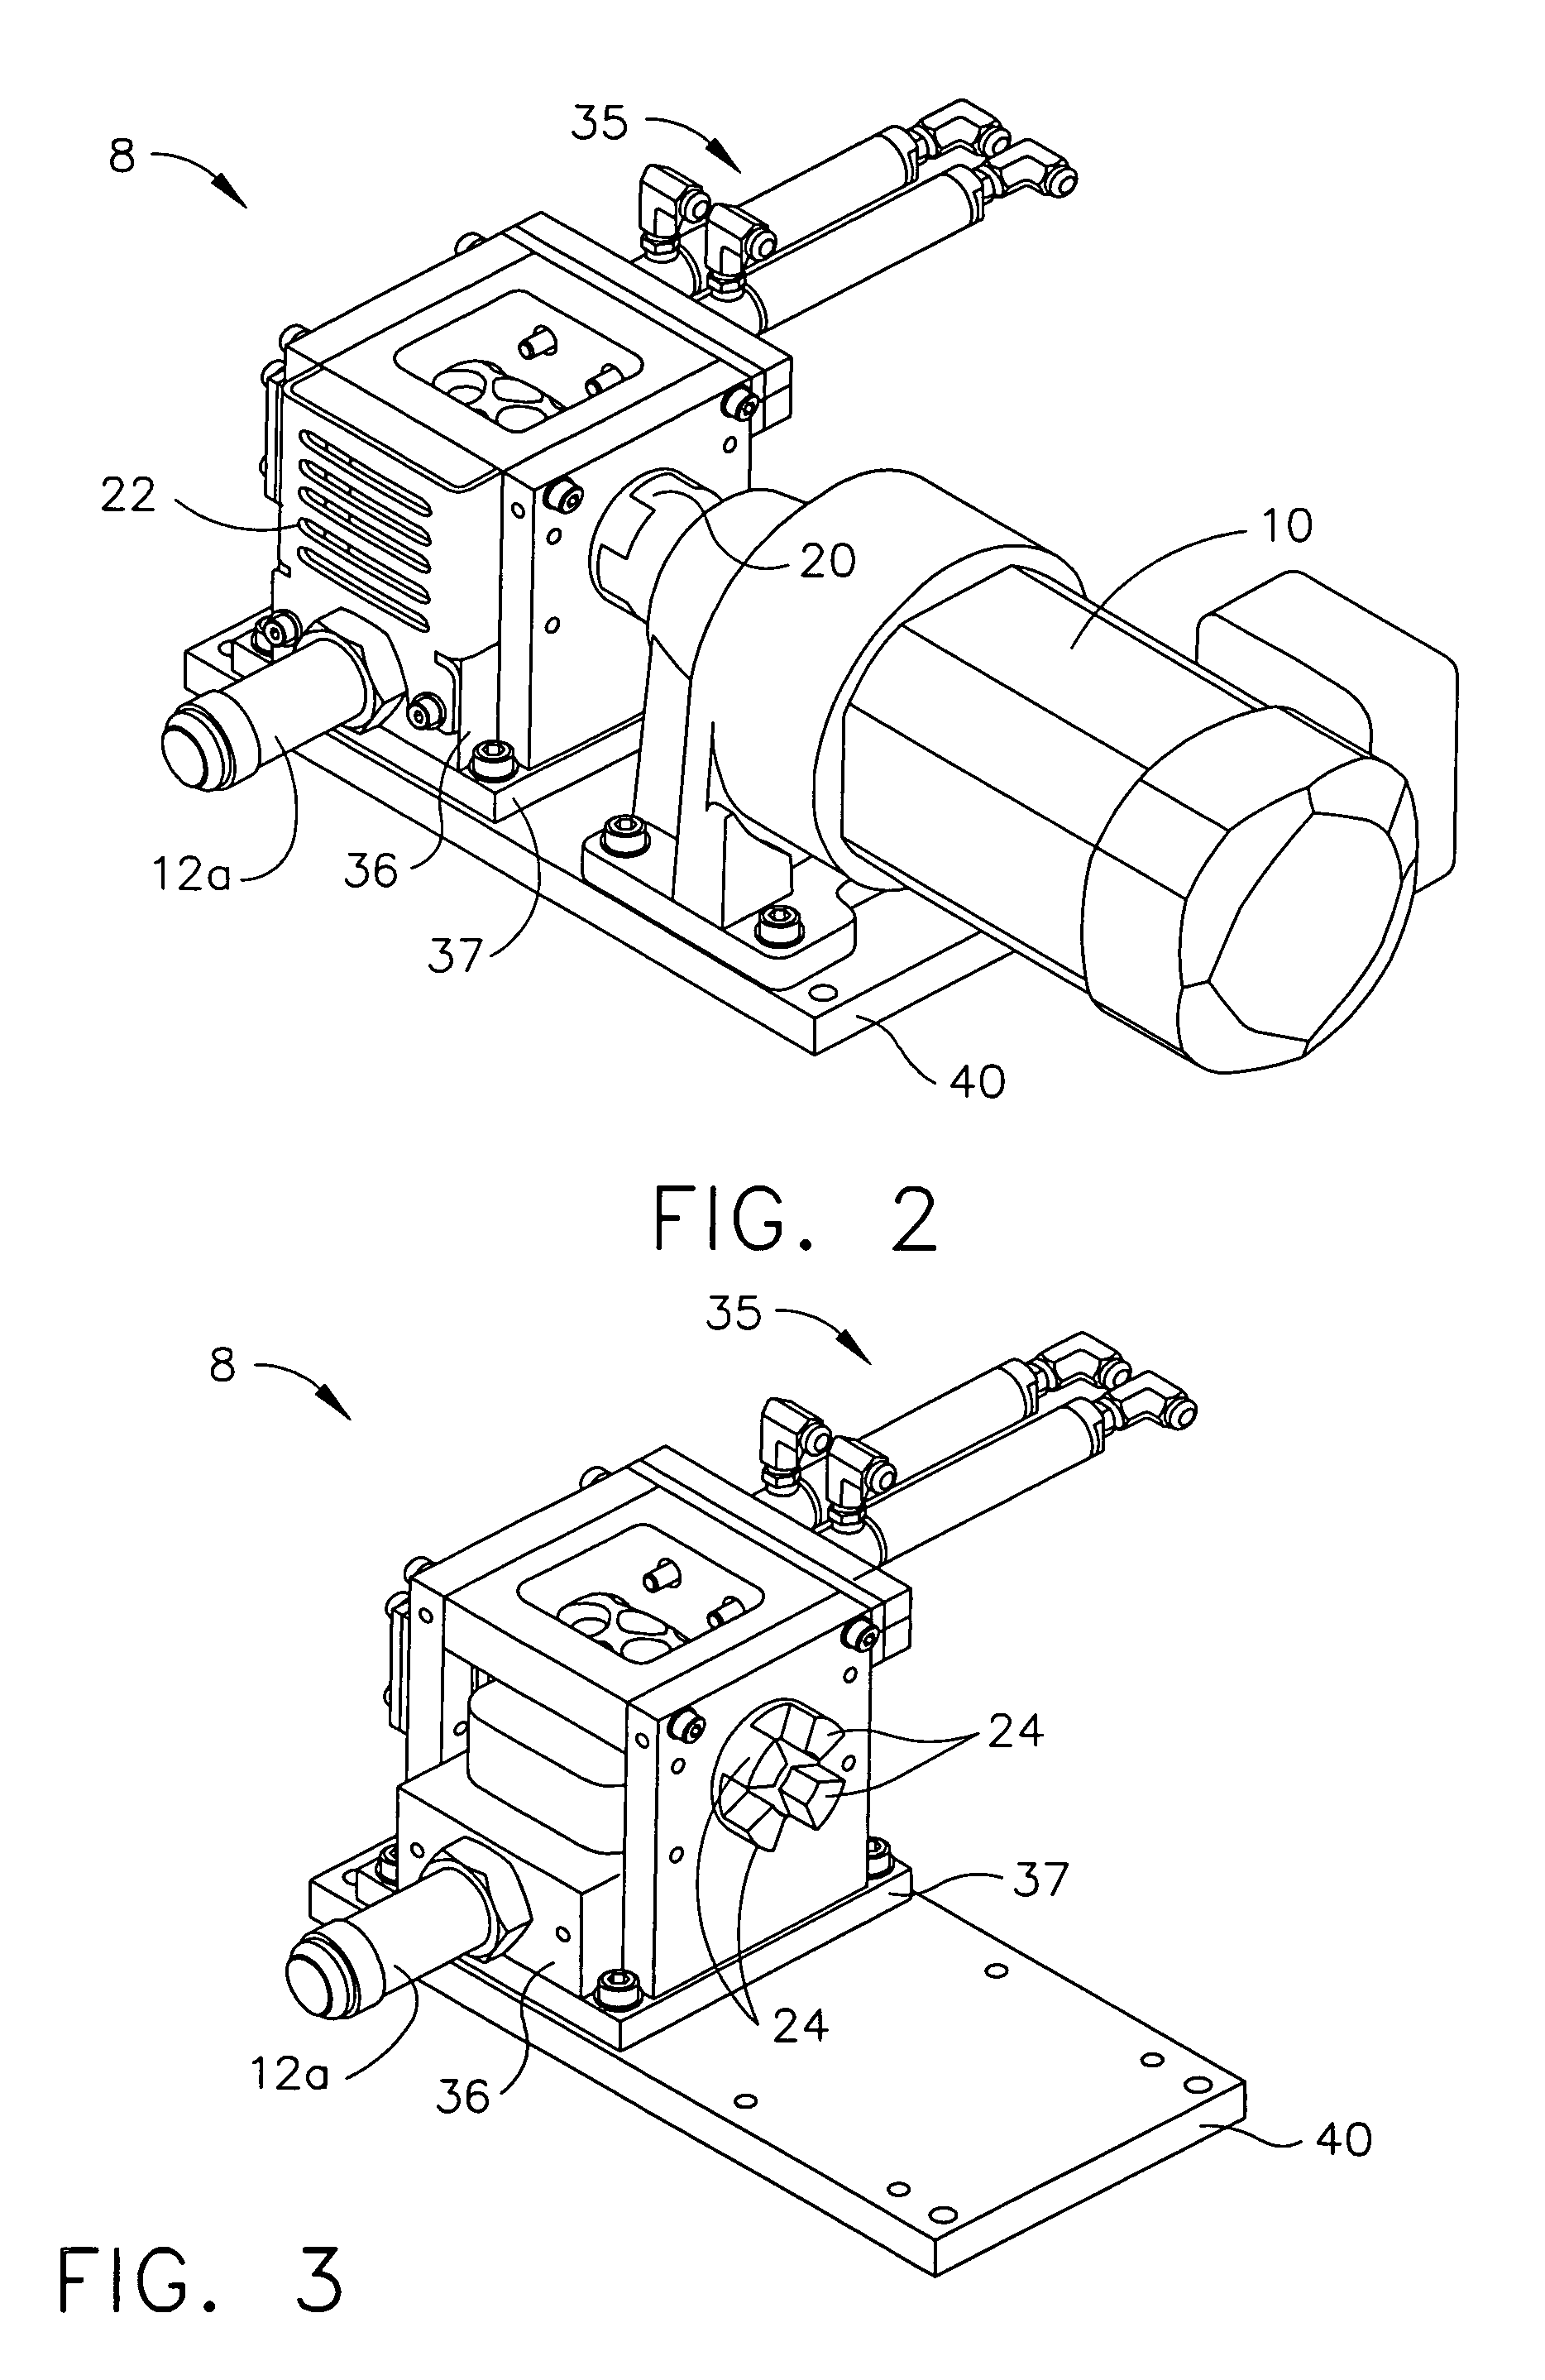 Feeder assembly for particle blast system